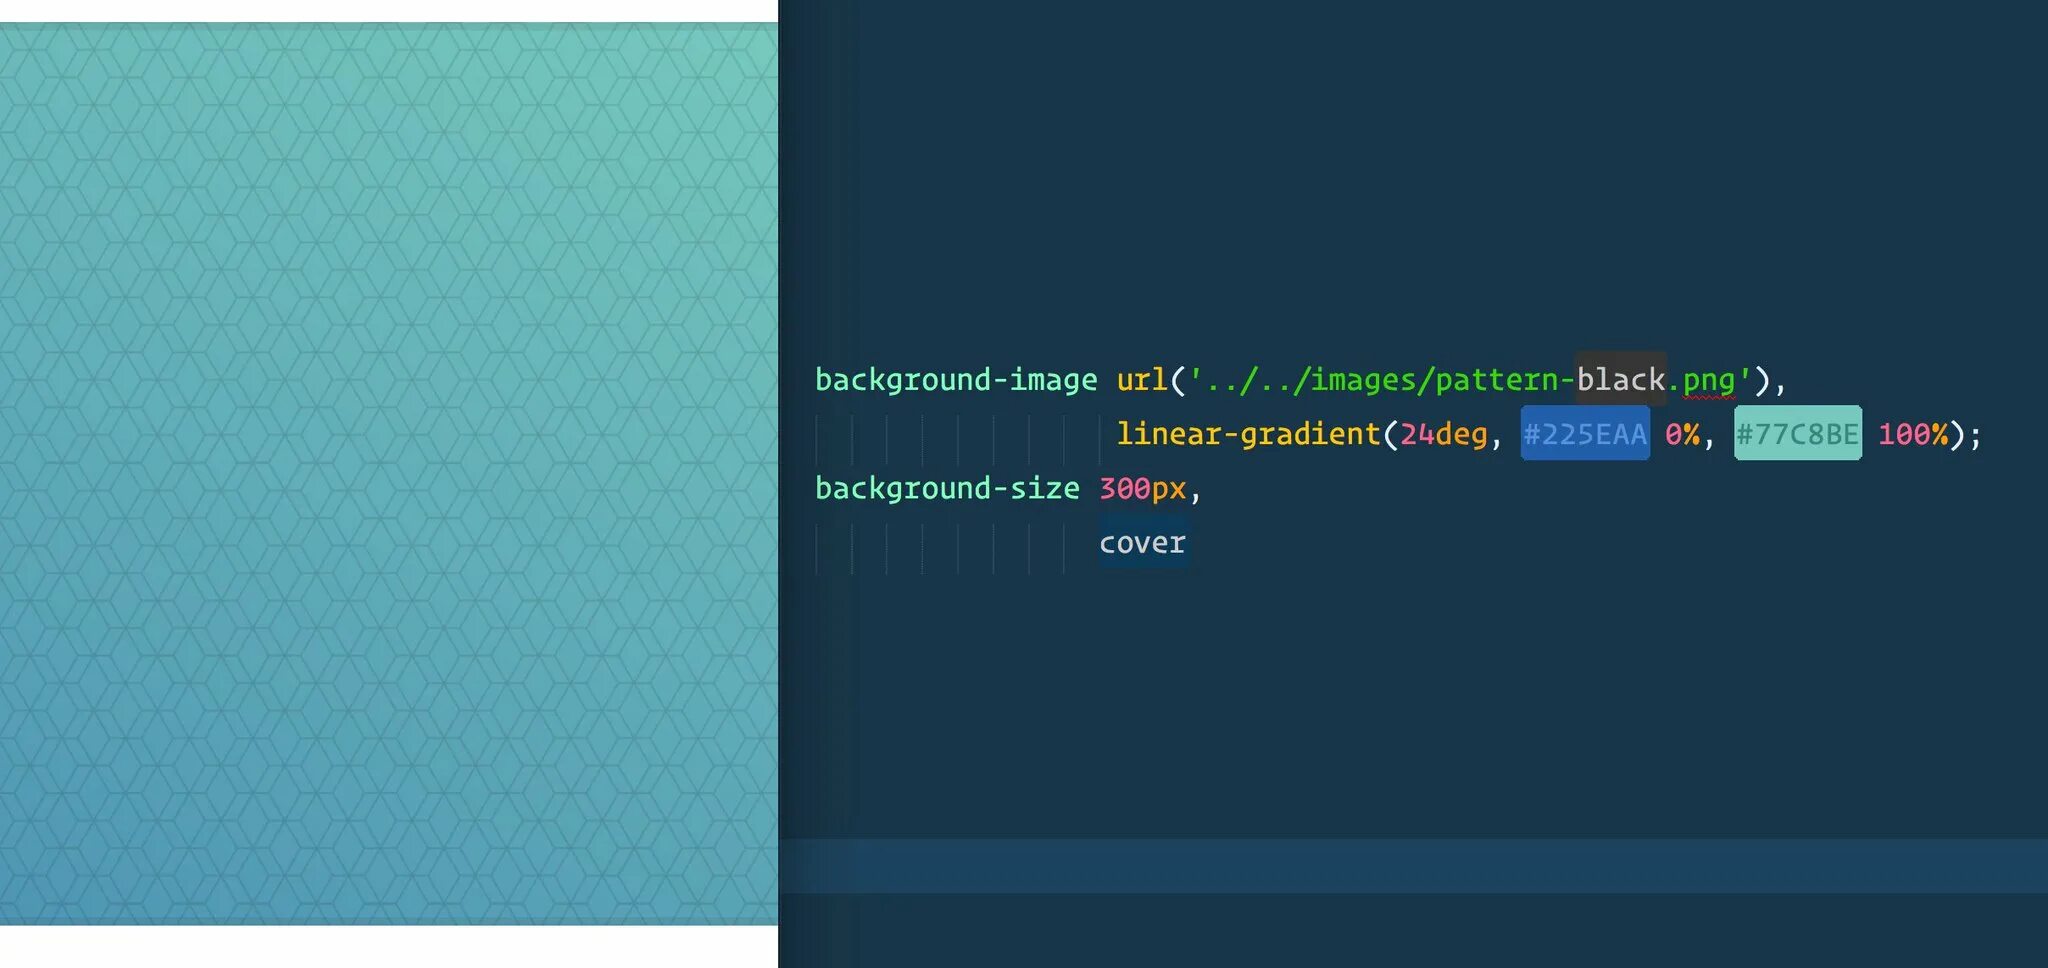 Css contain. Background CSS. Background Size html. Background Size CSS. Как задать background image CSS.